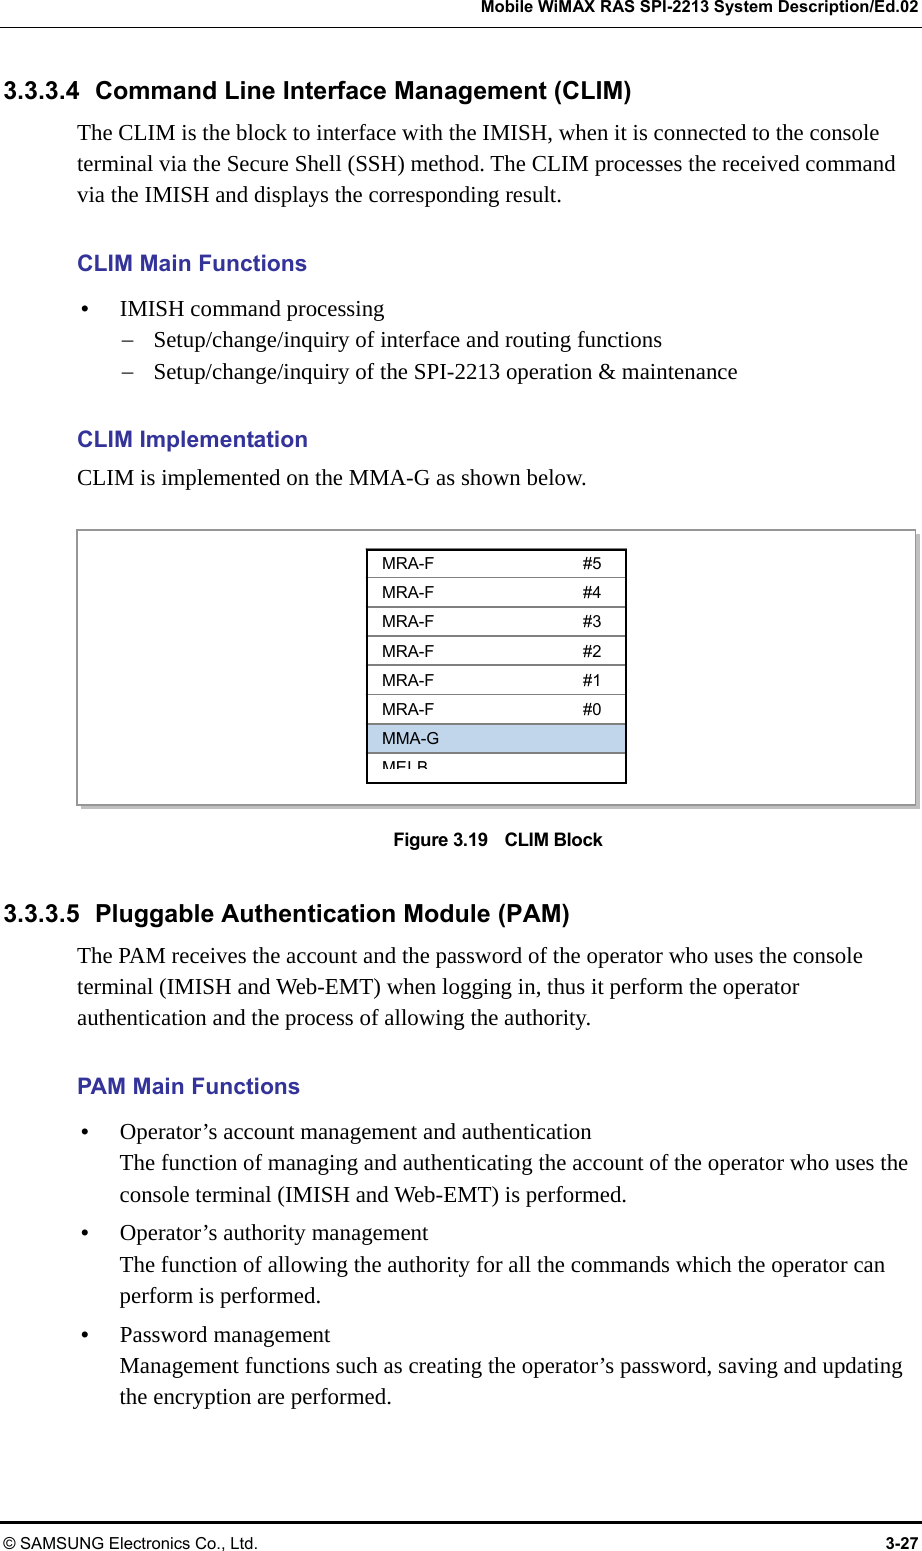   Mobile WiMAX RAS SPI-2213 System Description/Ed.02 © SAMSUNG Electronics Co., Ltd.  3-27 3.3.3.4  Command Line Interface Management (CLIM) The CLIM is the block to interface with the IMISH, when it is connected to the console terminal via the Secure Shell (SSH) method. The CLIM processes the received command via the IMISH and displays the corresponding result.  CLIM Main Functions y IMISH command processing − Setup/change/inquiry of interface and routing functions − Setup/change/inquiry of the SPI-2213 operation &amp; maintenance  CLIM Implementation CLIM is implemented on the MMA-G as shown below.  Figure 3.19    CLIM Block  3.3.3.5 Pluggable Authentication Module (PAM) The PAM receives the account and the password of the operator who uses the console terminal (IMISH and Web-EMT) when logging in, thus it perform the operator authentication and the process of allowing the authority.  PAM Main Functions y Operator’s account management and authentication The function of managing and authenticating the account of the operator who uses the console terminal (IMISH and Web-EMT) is performed. y Operator’s authority management The function of allowing the authority for all the commands which the operator can perform is performed. y Password management Management functions such as creating the operator’s password, saving and updating the encryption are performed.  MRA-F #5 MRA-F #4 MRA-F #3 MRA-F #2 MRA-F #1 MRA-F #0 MMA-G MEIB